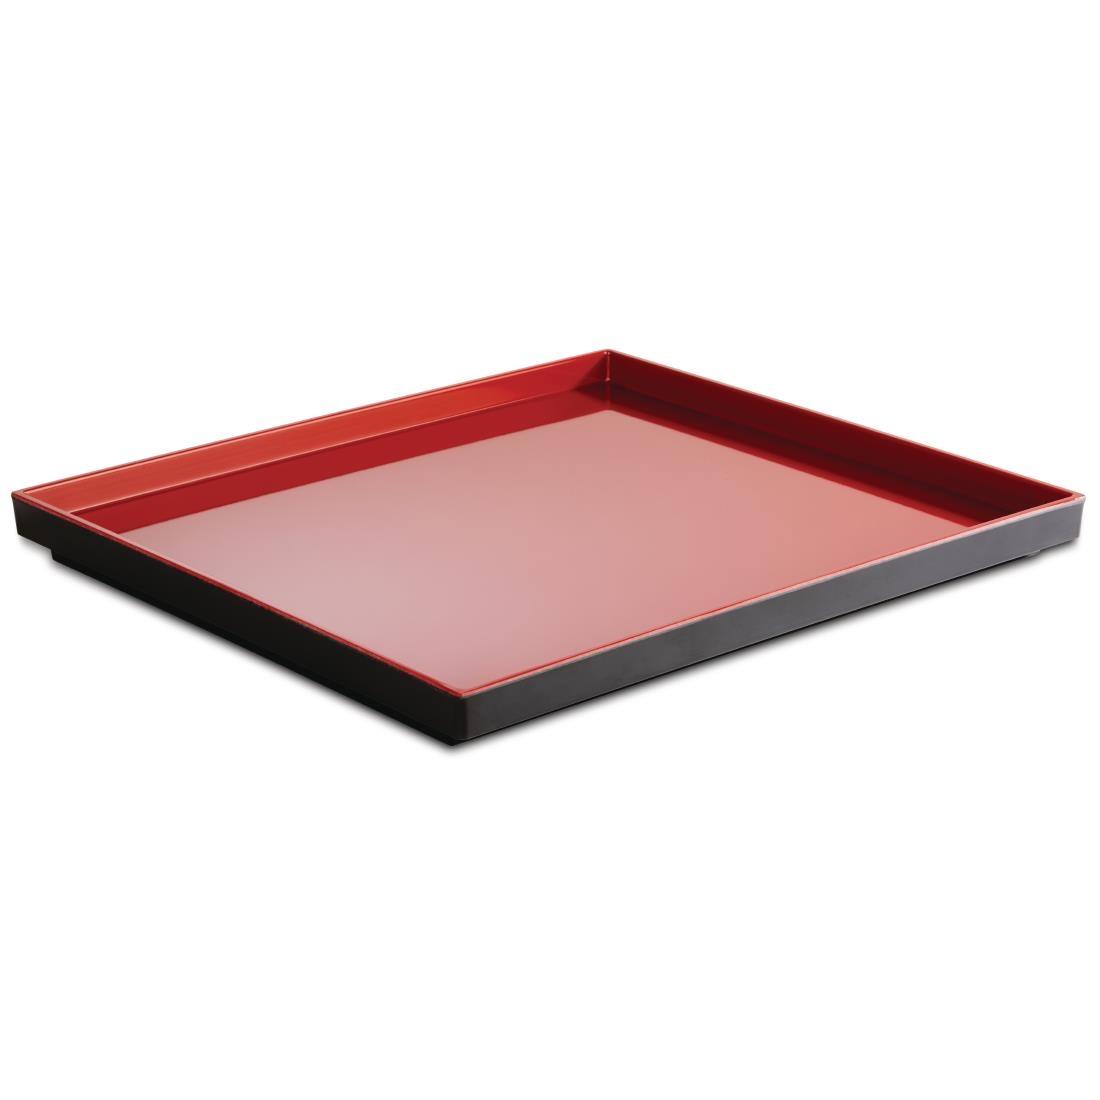 APS Asia+  Red Tray GN 2/3 - Each - DT778 - 1